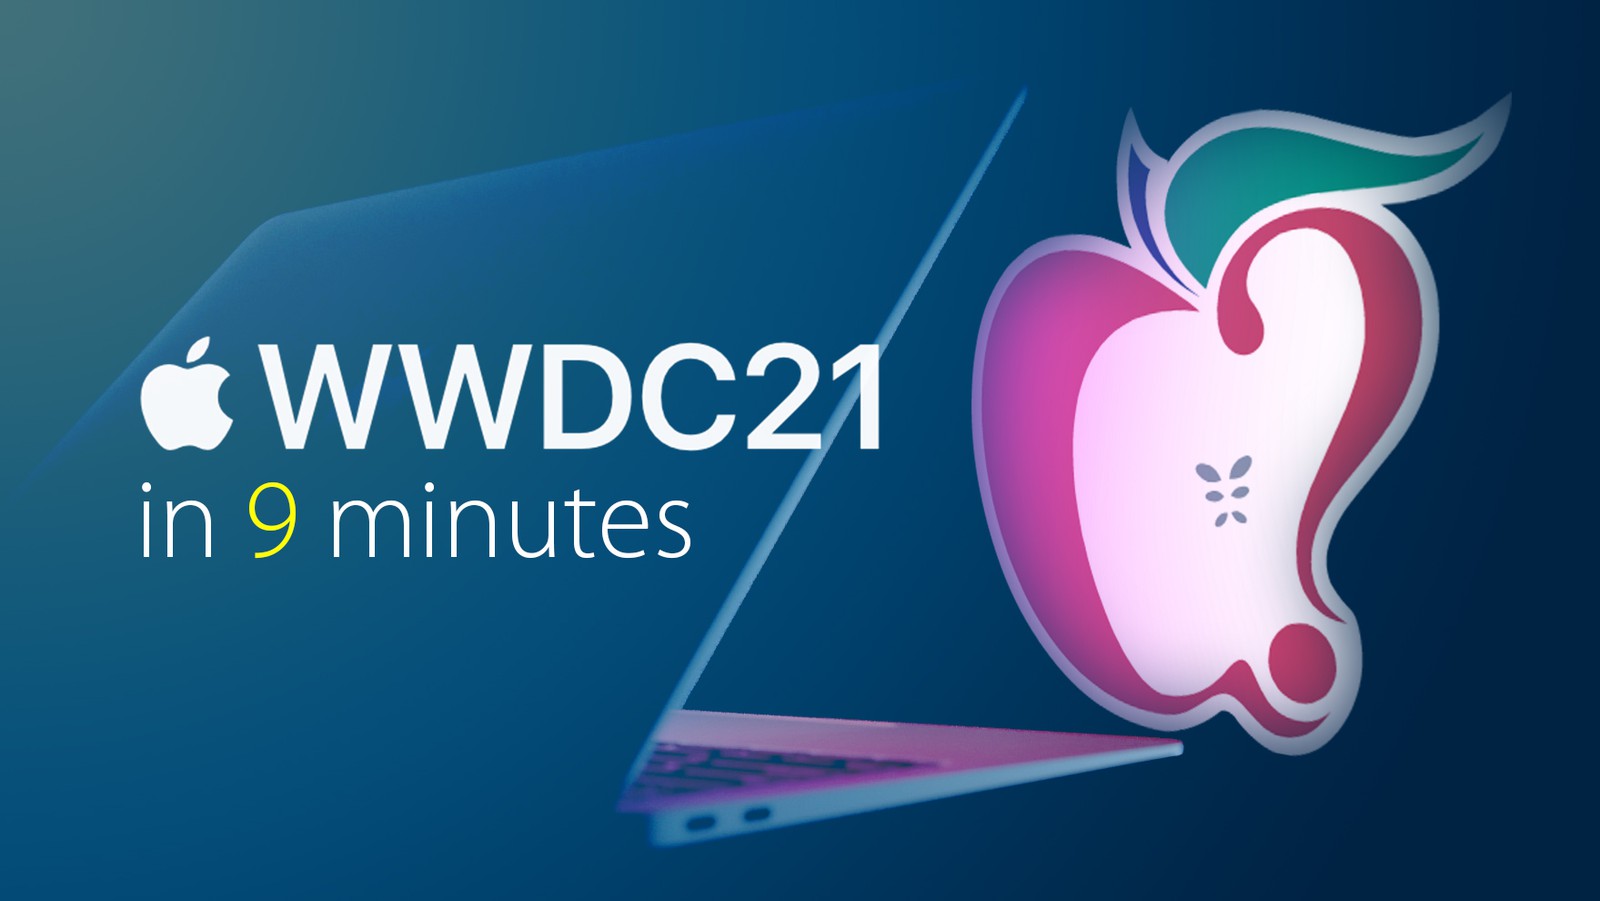 Top Stories: WWDC Recap With iOS 15, macOS Monterey, and ...